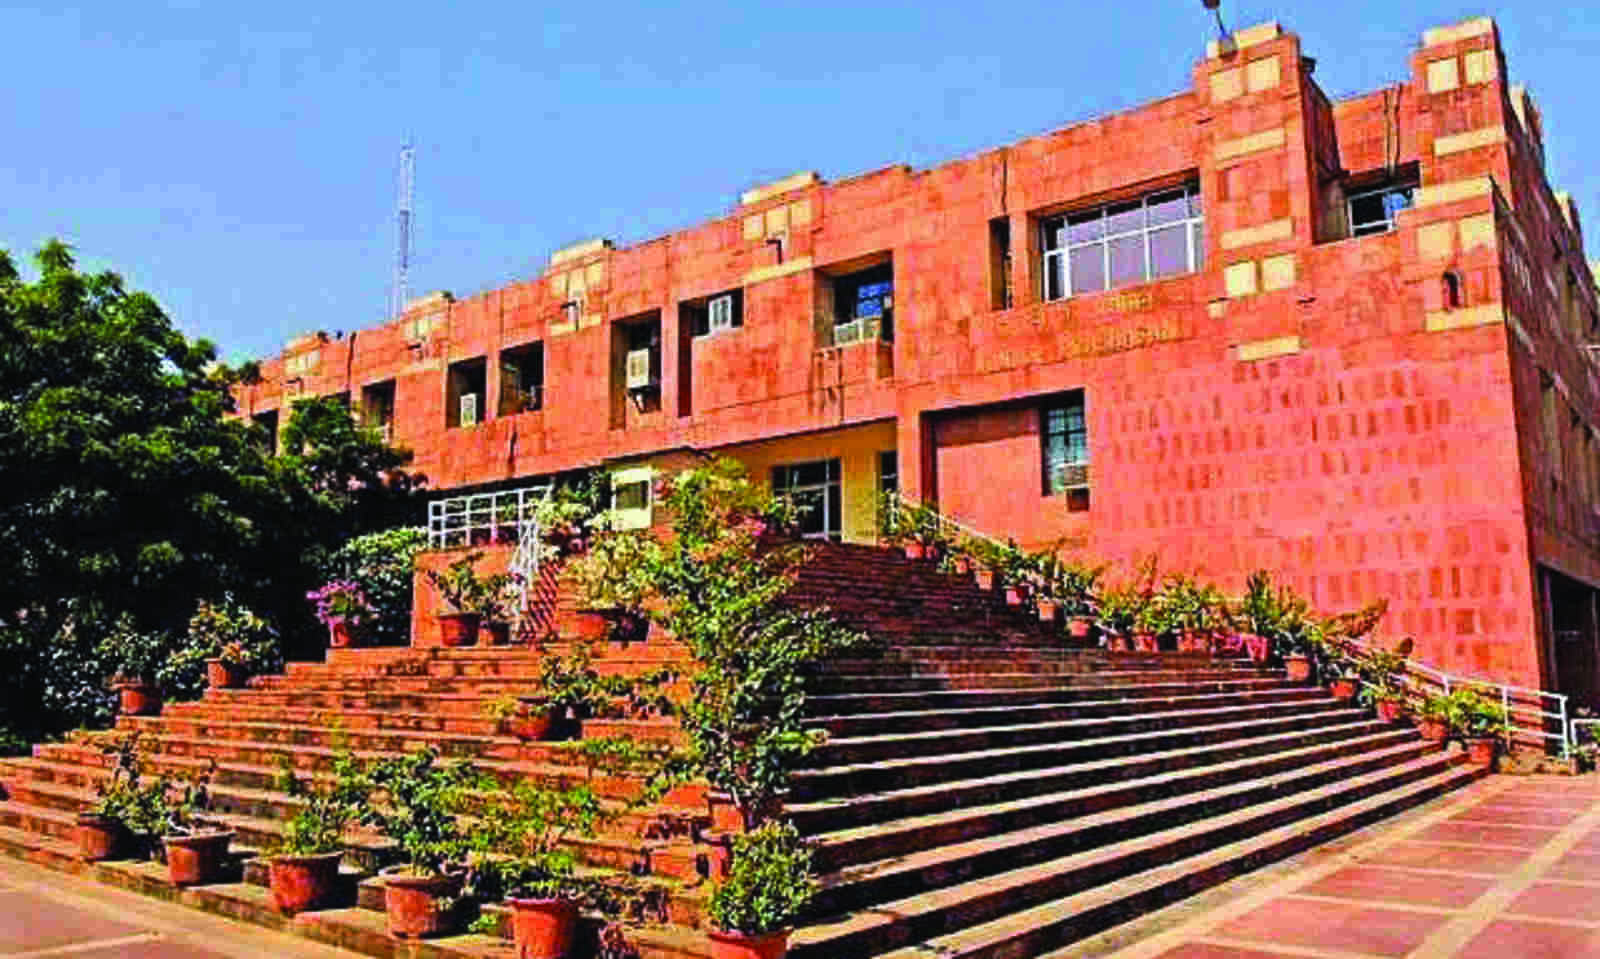 No fine will be imposed on students for 2019 fee hike protest at admin block confirms JNU vice chancellor